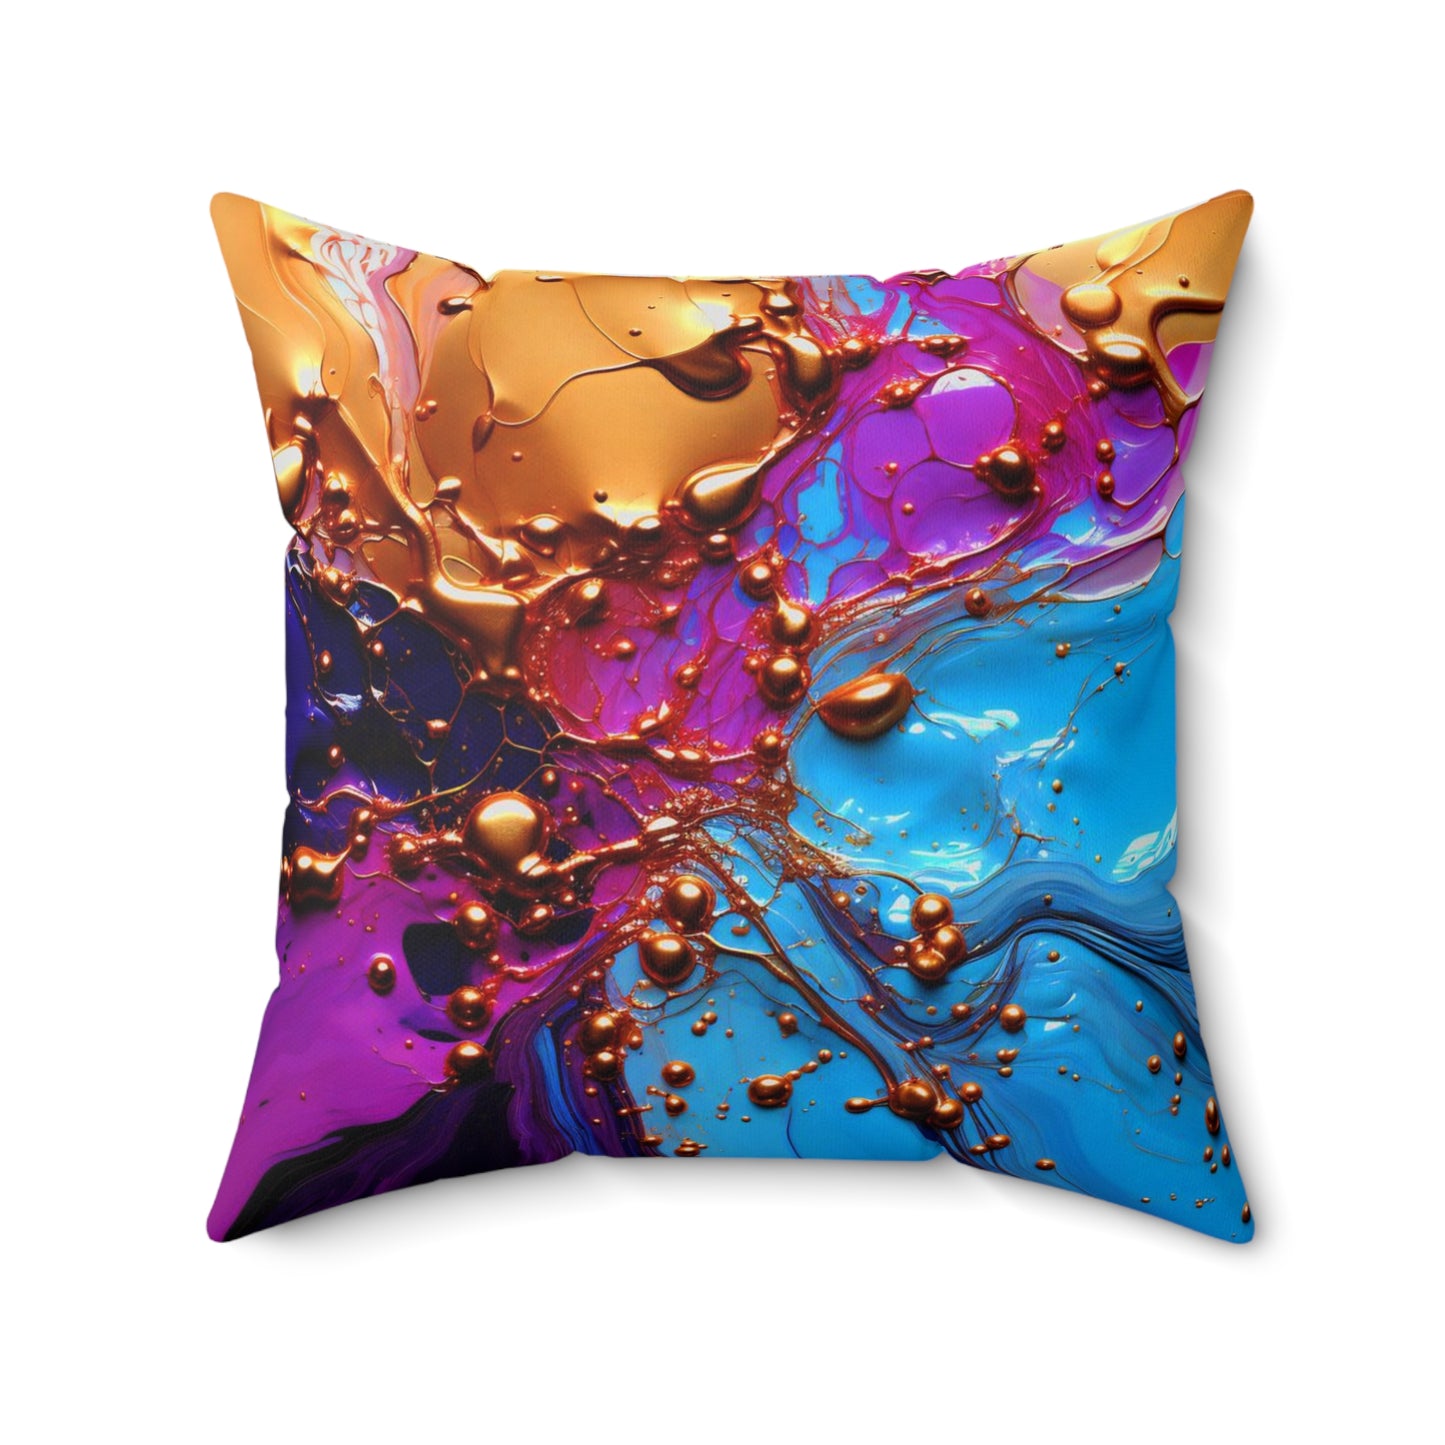 Vibrant Expressions Accent Pillow